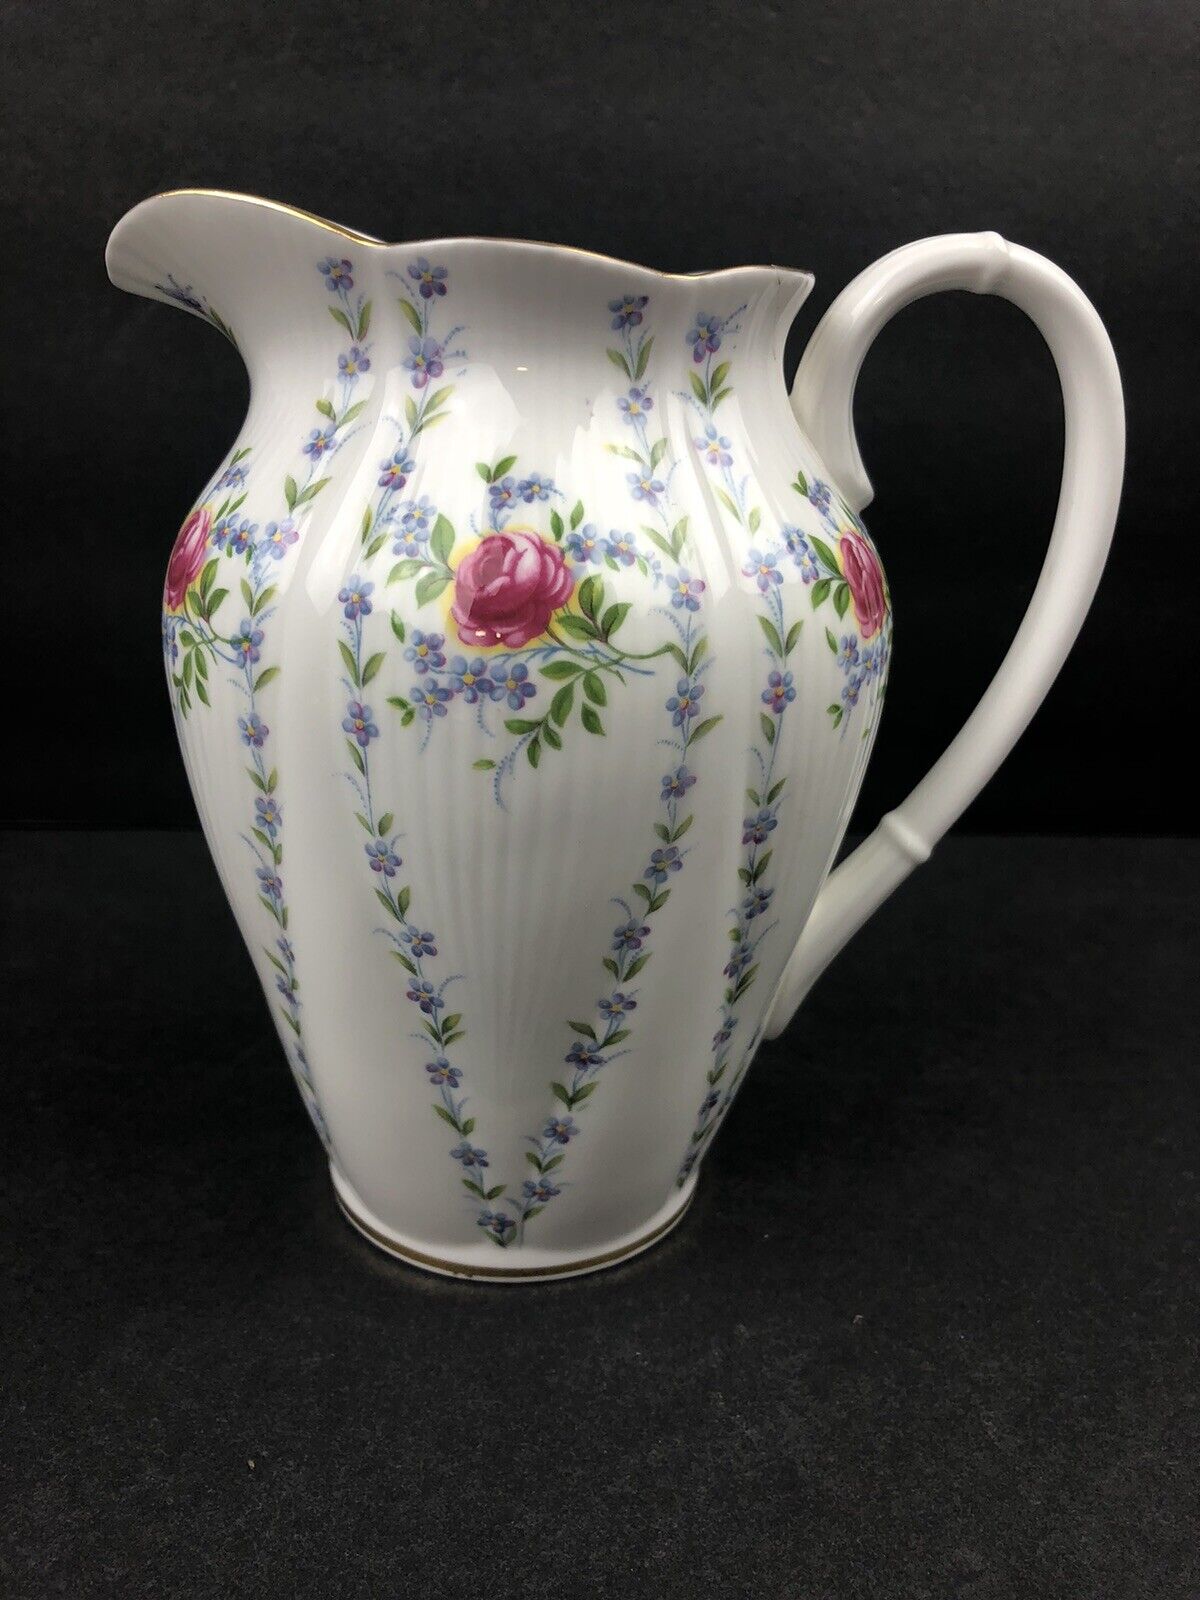 Vintage Royal Albert Minuet Creamer. Cracked By Handle And On Side.